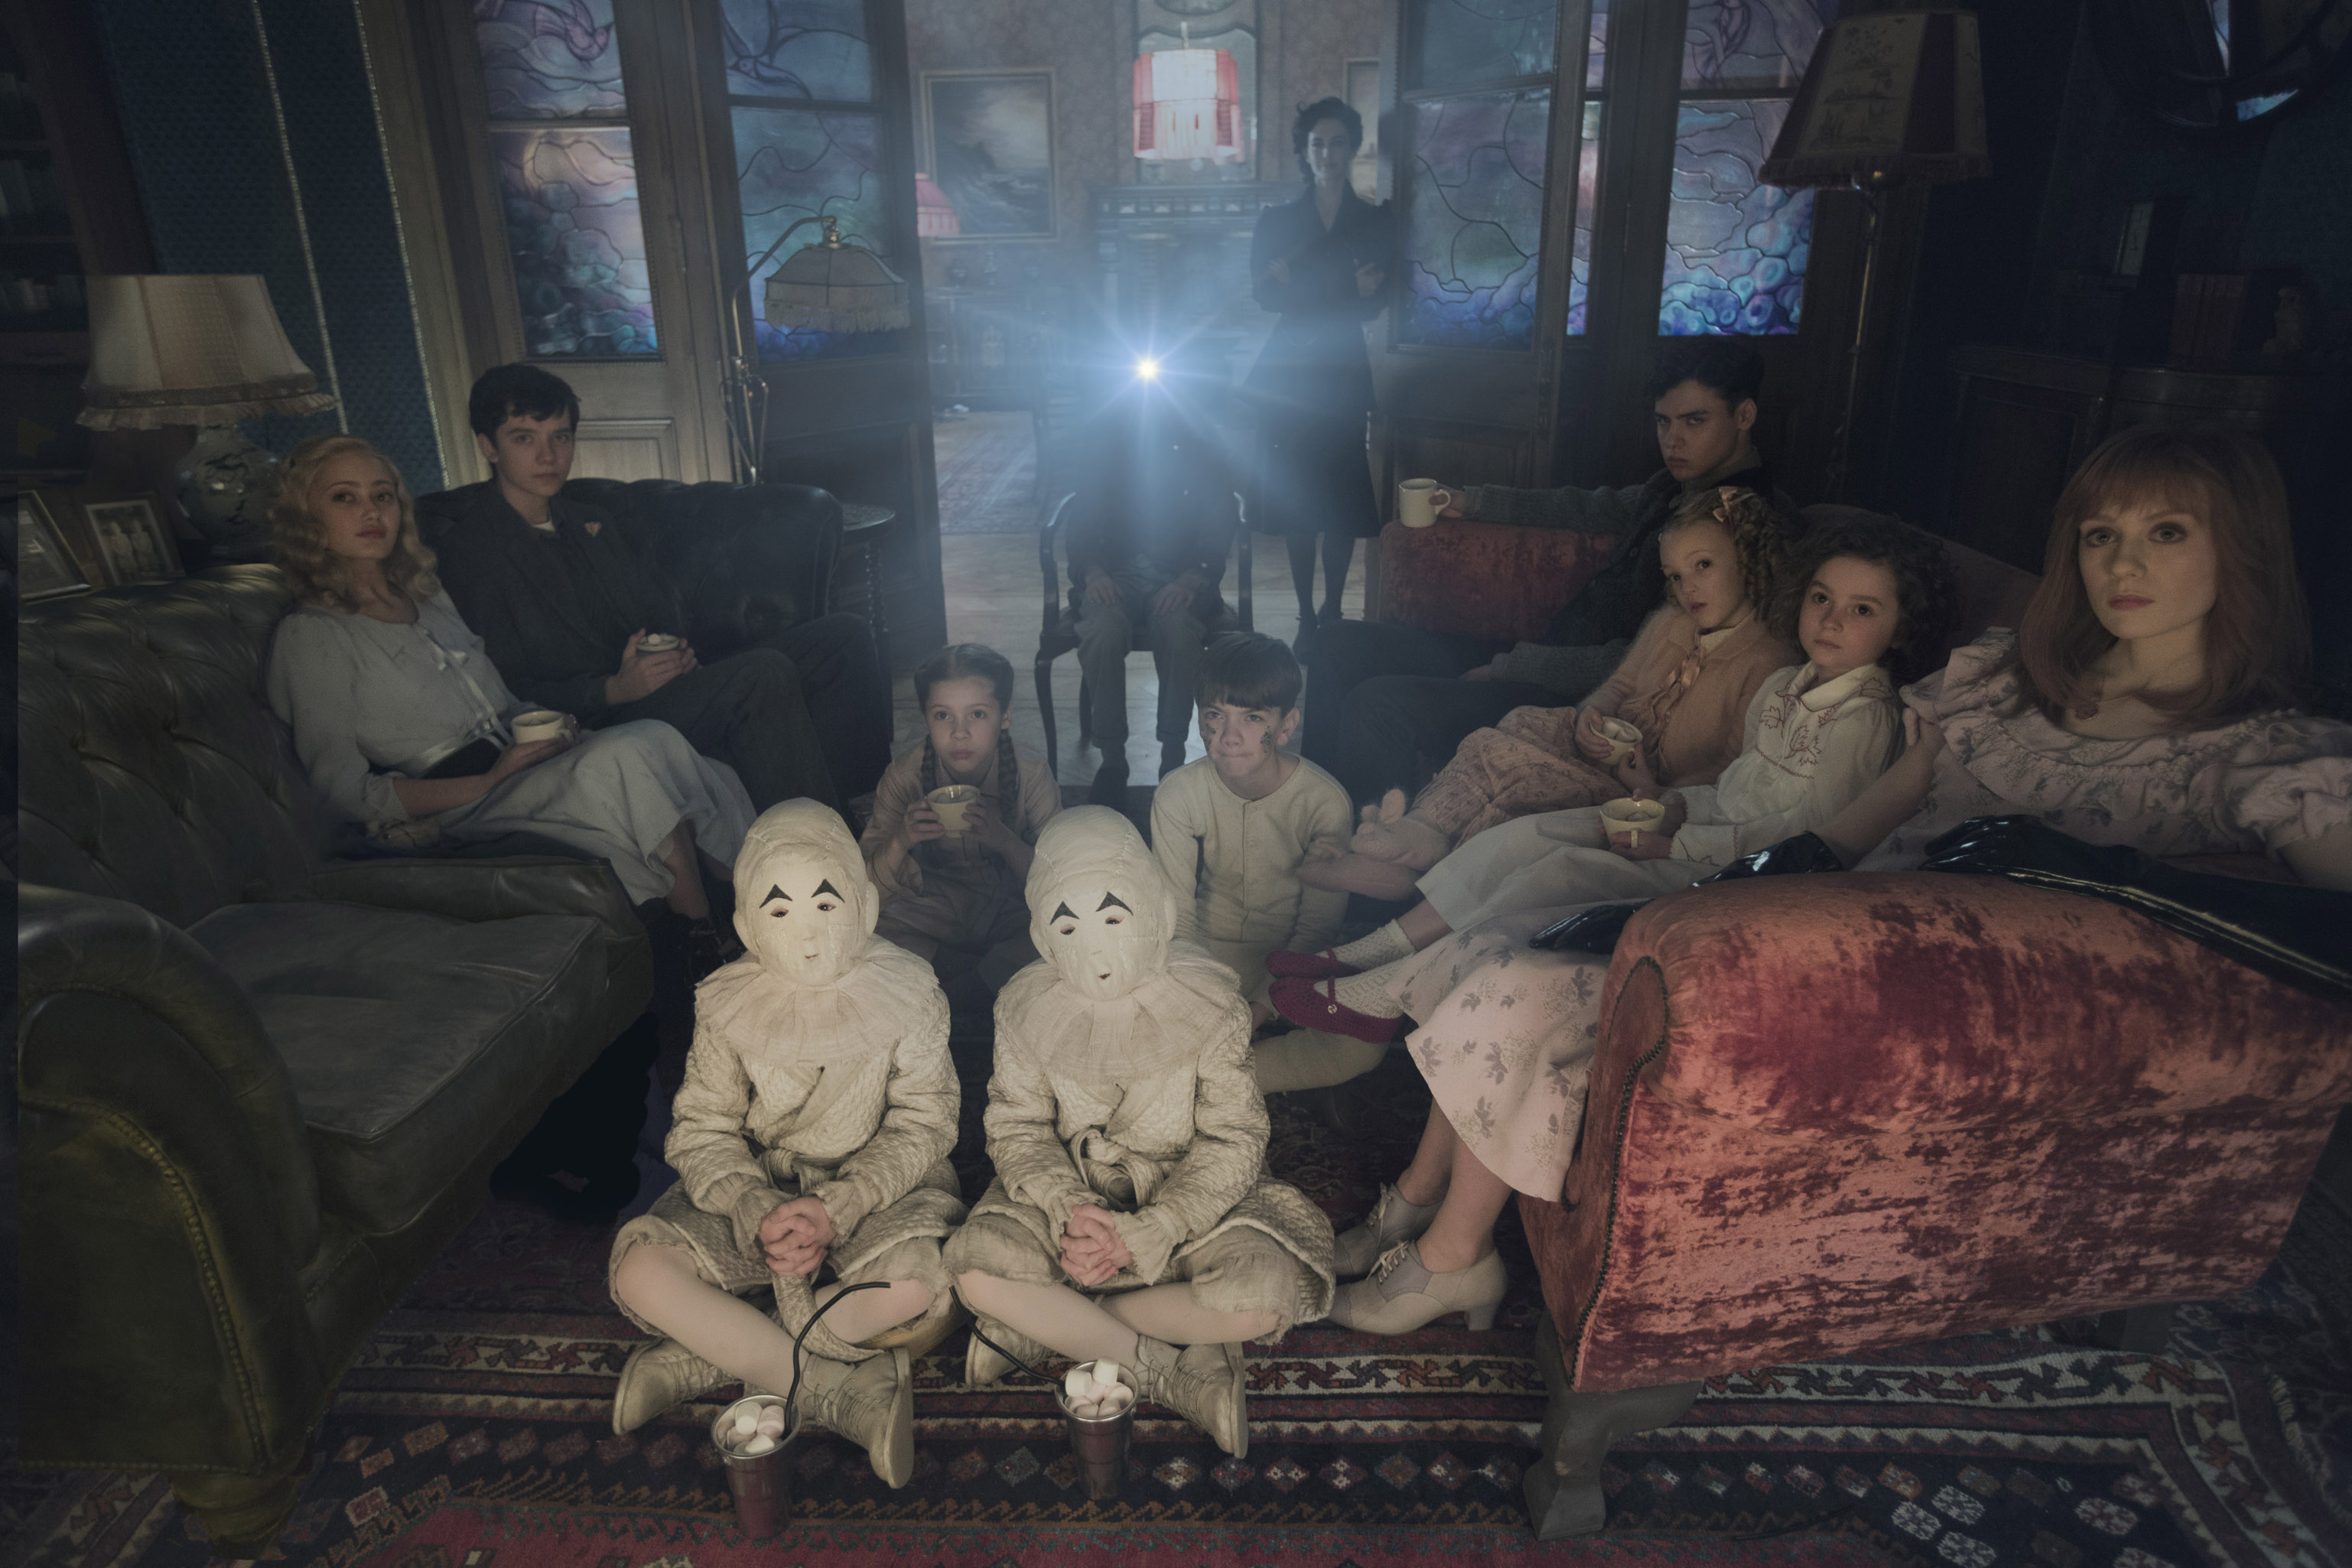 DF-02825modified - Seated on the floor: the twins (Thomas and Joseph Odwell), Fiona (Georgia Pemberton) and Hugh (Milo Parker), Left to right: Emma (Ella Purnell), Jake (Asa Butterfield), Horace (Hayden Keeler-Stone), Miss Peregrine (Eva Green), Enoch (Finlay Macmillan), Claire (Raffiella Chapman), Bronwyn (Pixie Davies) and Olive (Lauren McCrostie) - are the very special residents of MISS PEREGRINE’S HOME FOR PECULIAR CHILDREN. Photo Credit: Leah Gallo.